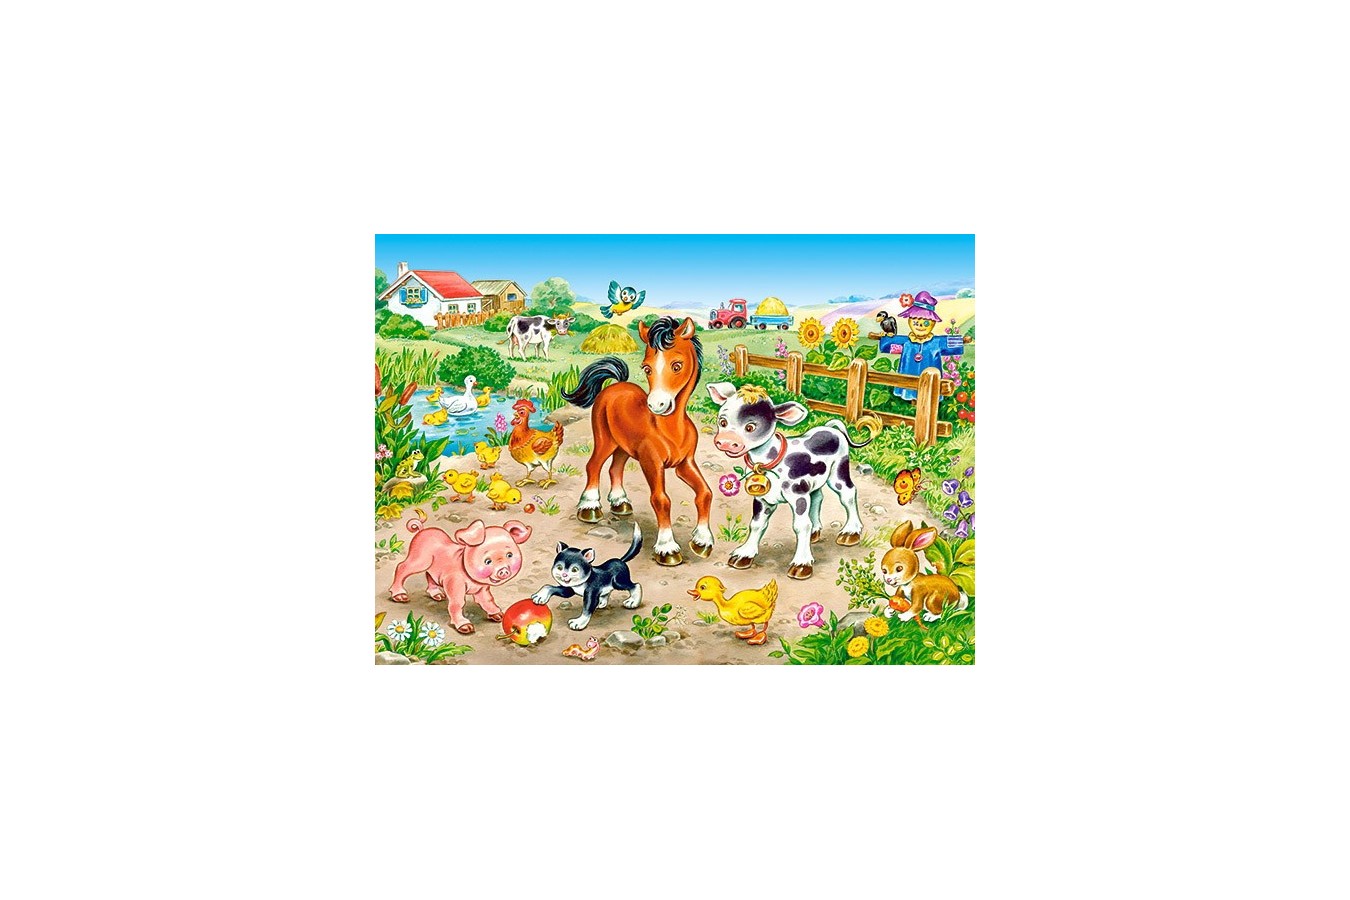 Puzzle Castorland - On The Farm, 120 Piese